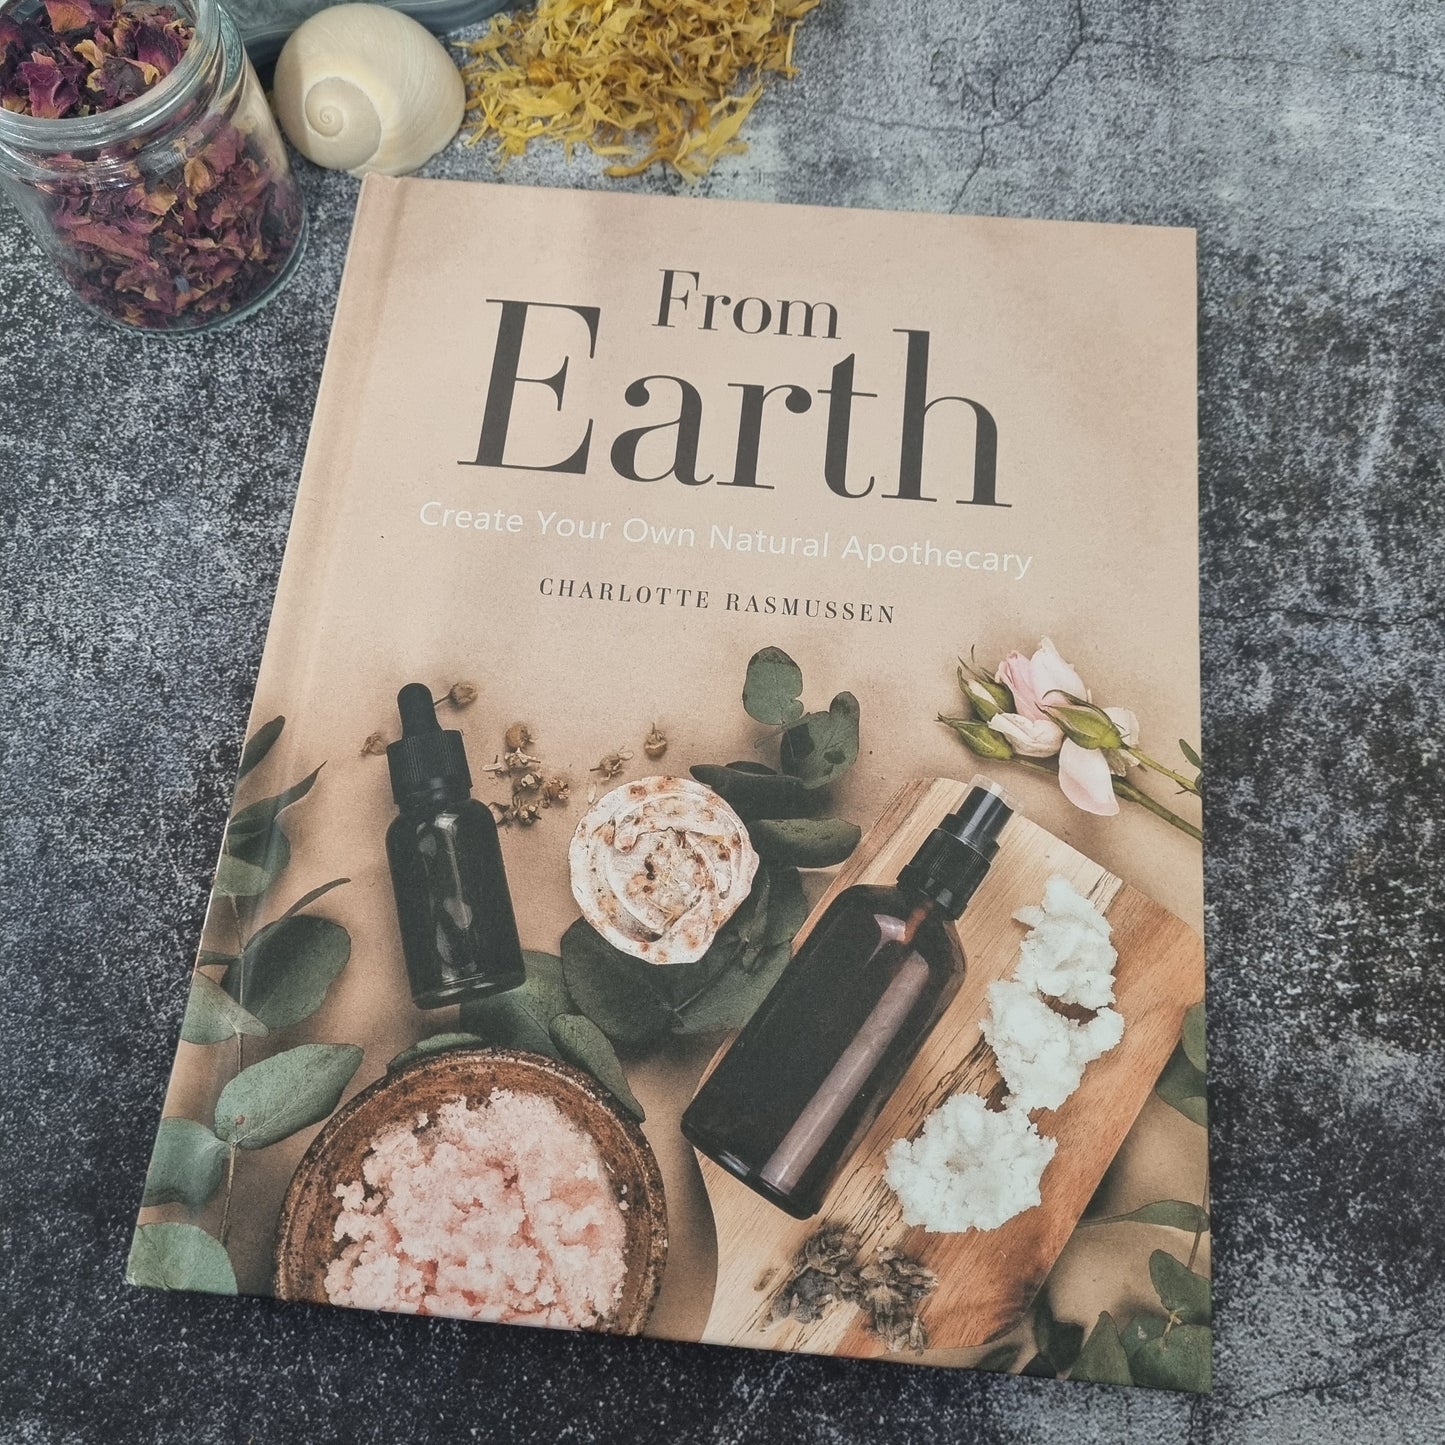 From Earth: A guide to creating a natural apothecary